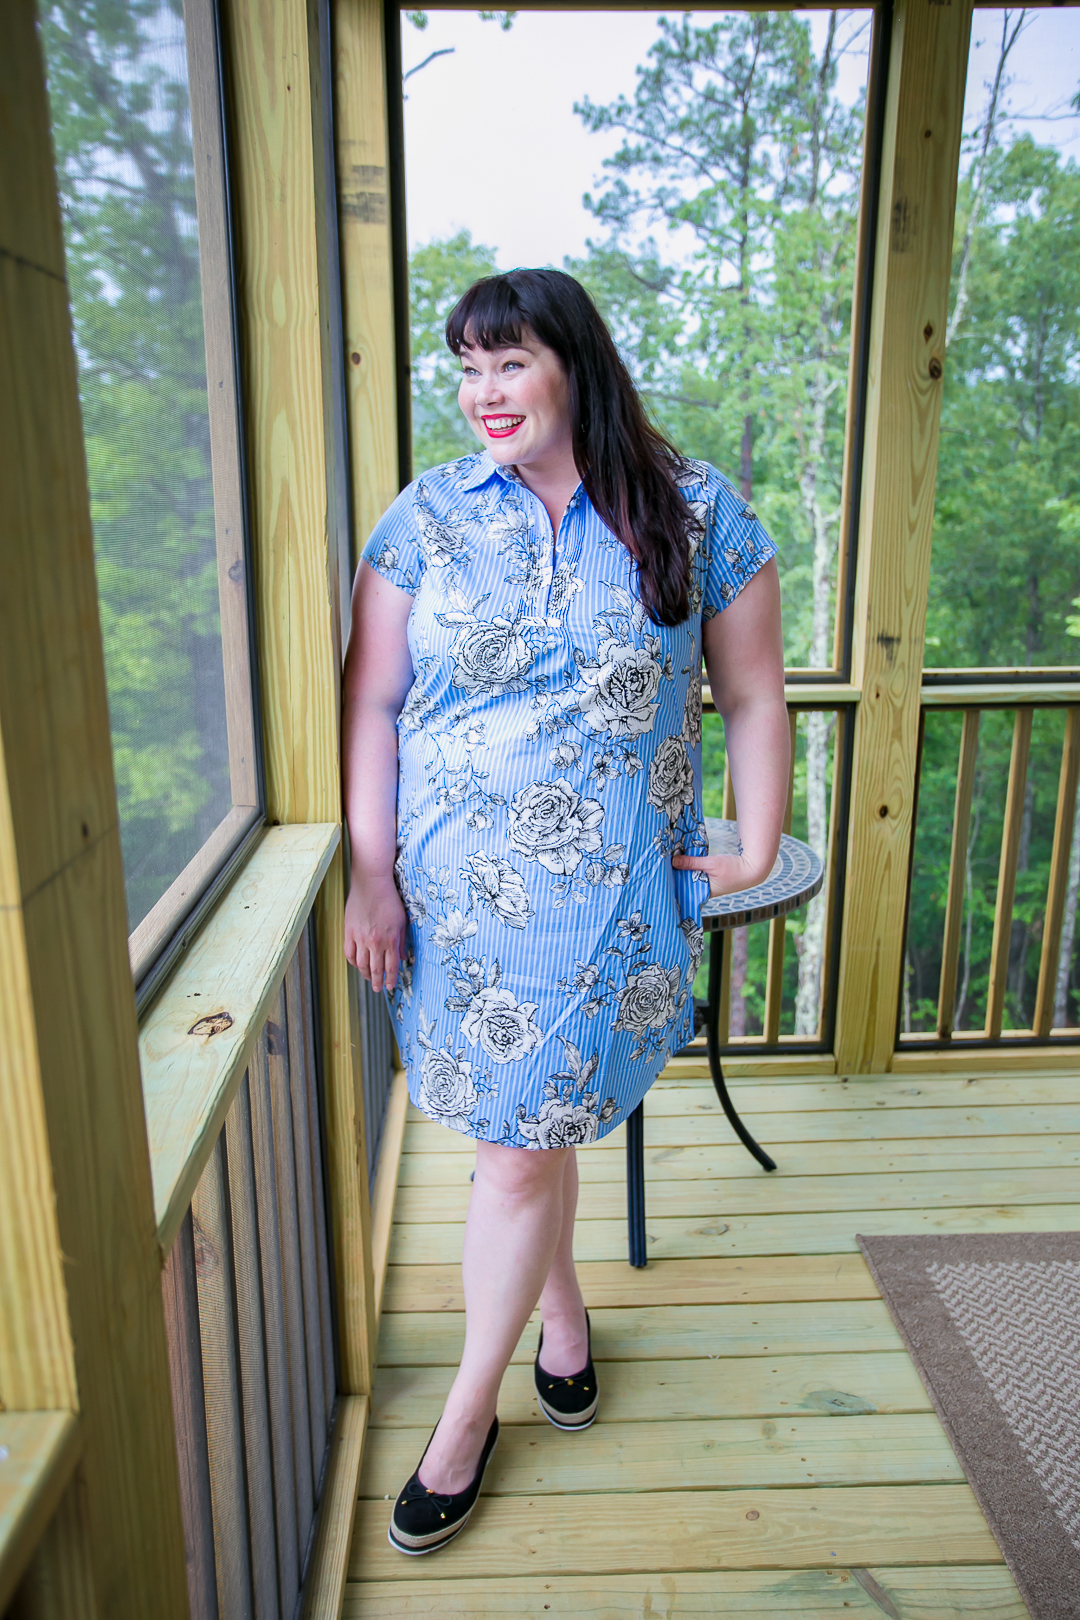 Best Dressed: 5 Style Rules for Plus Size Wedding Guests